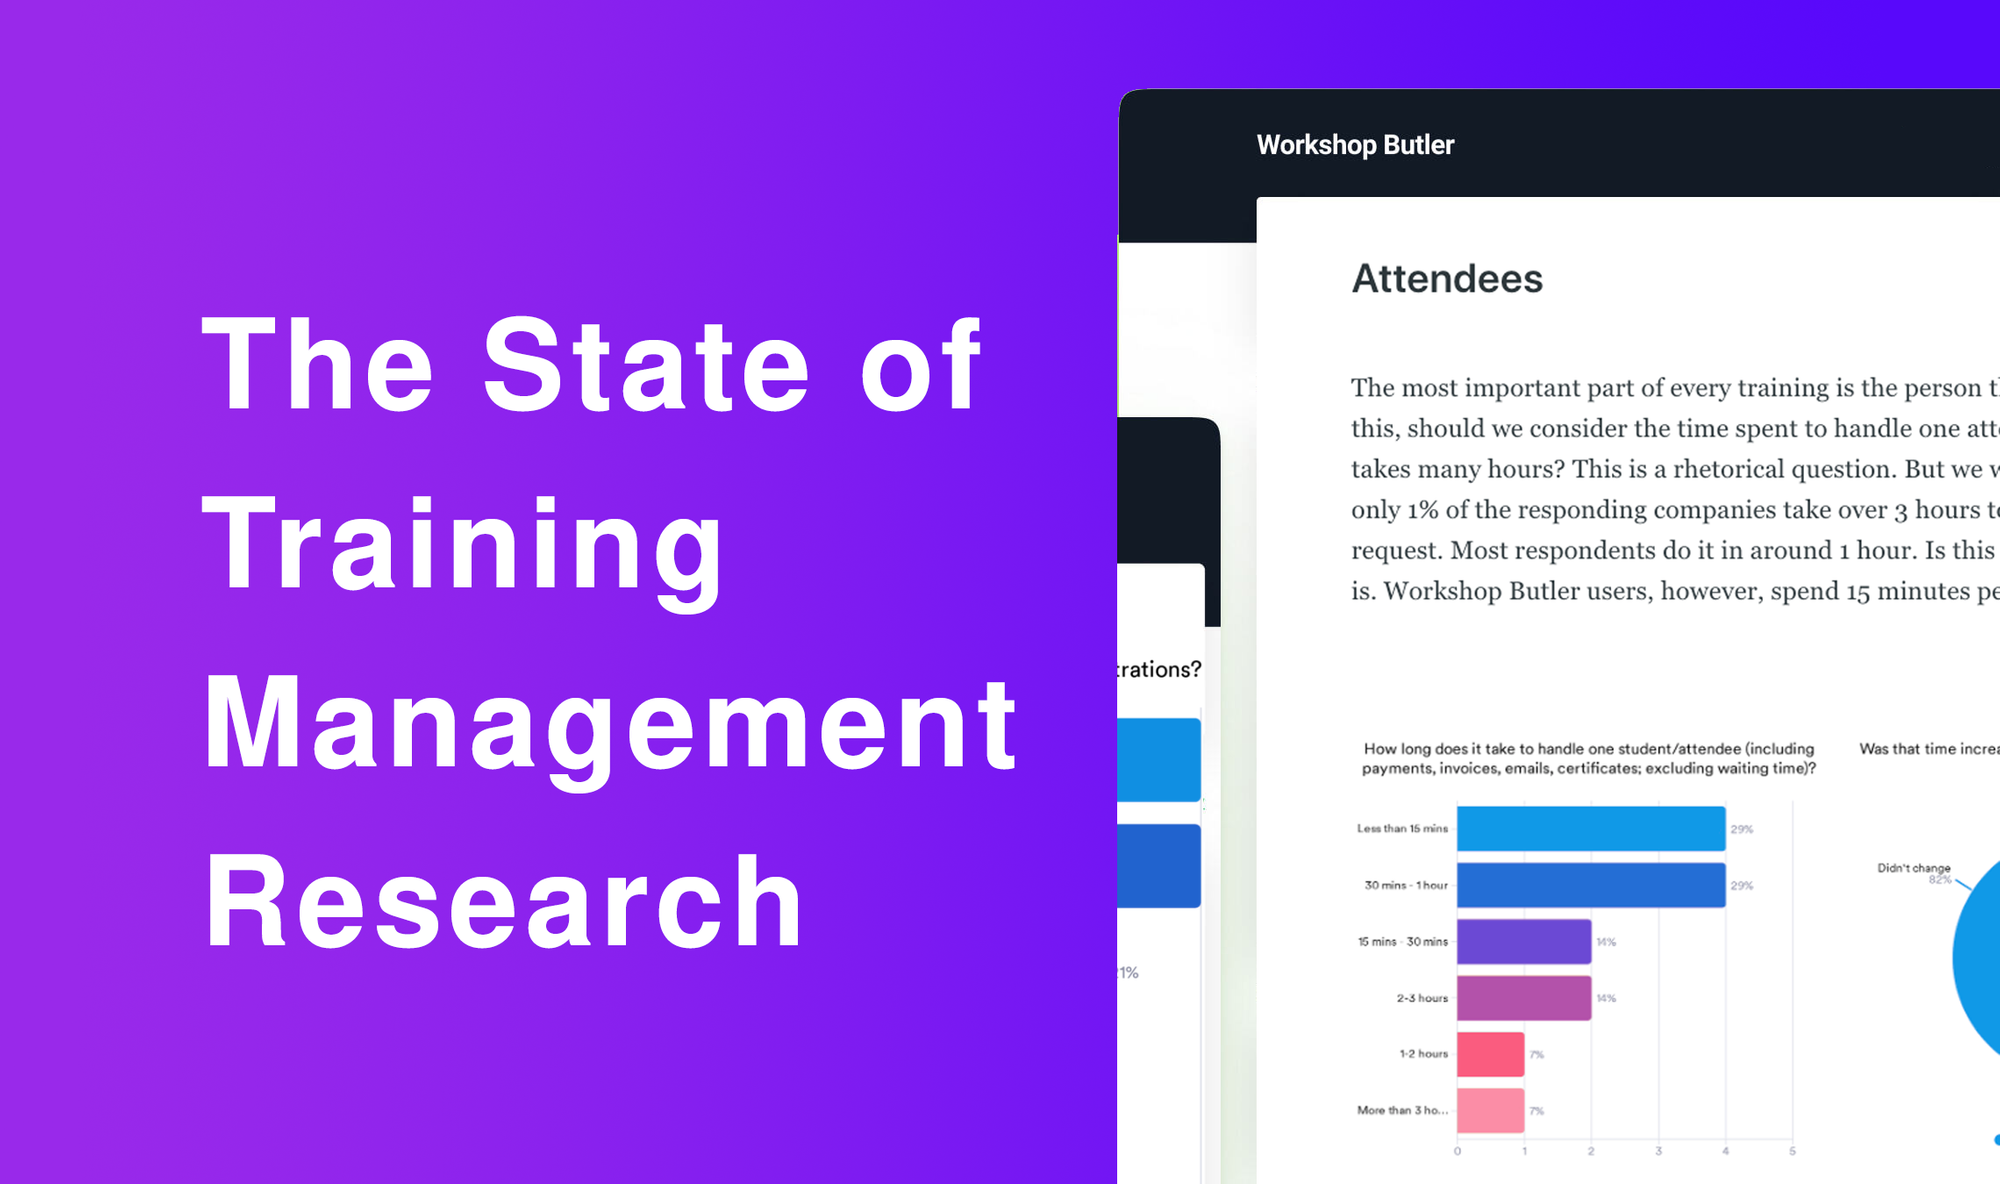 The state of training management 2020 survey results